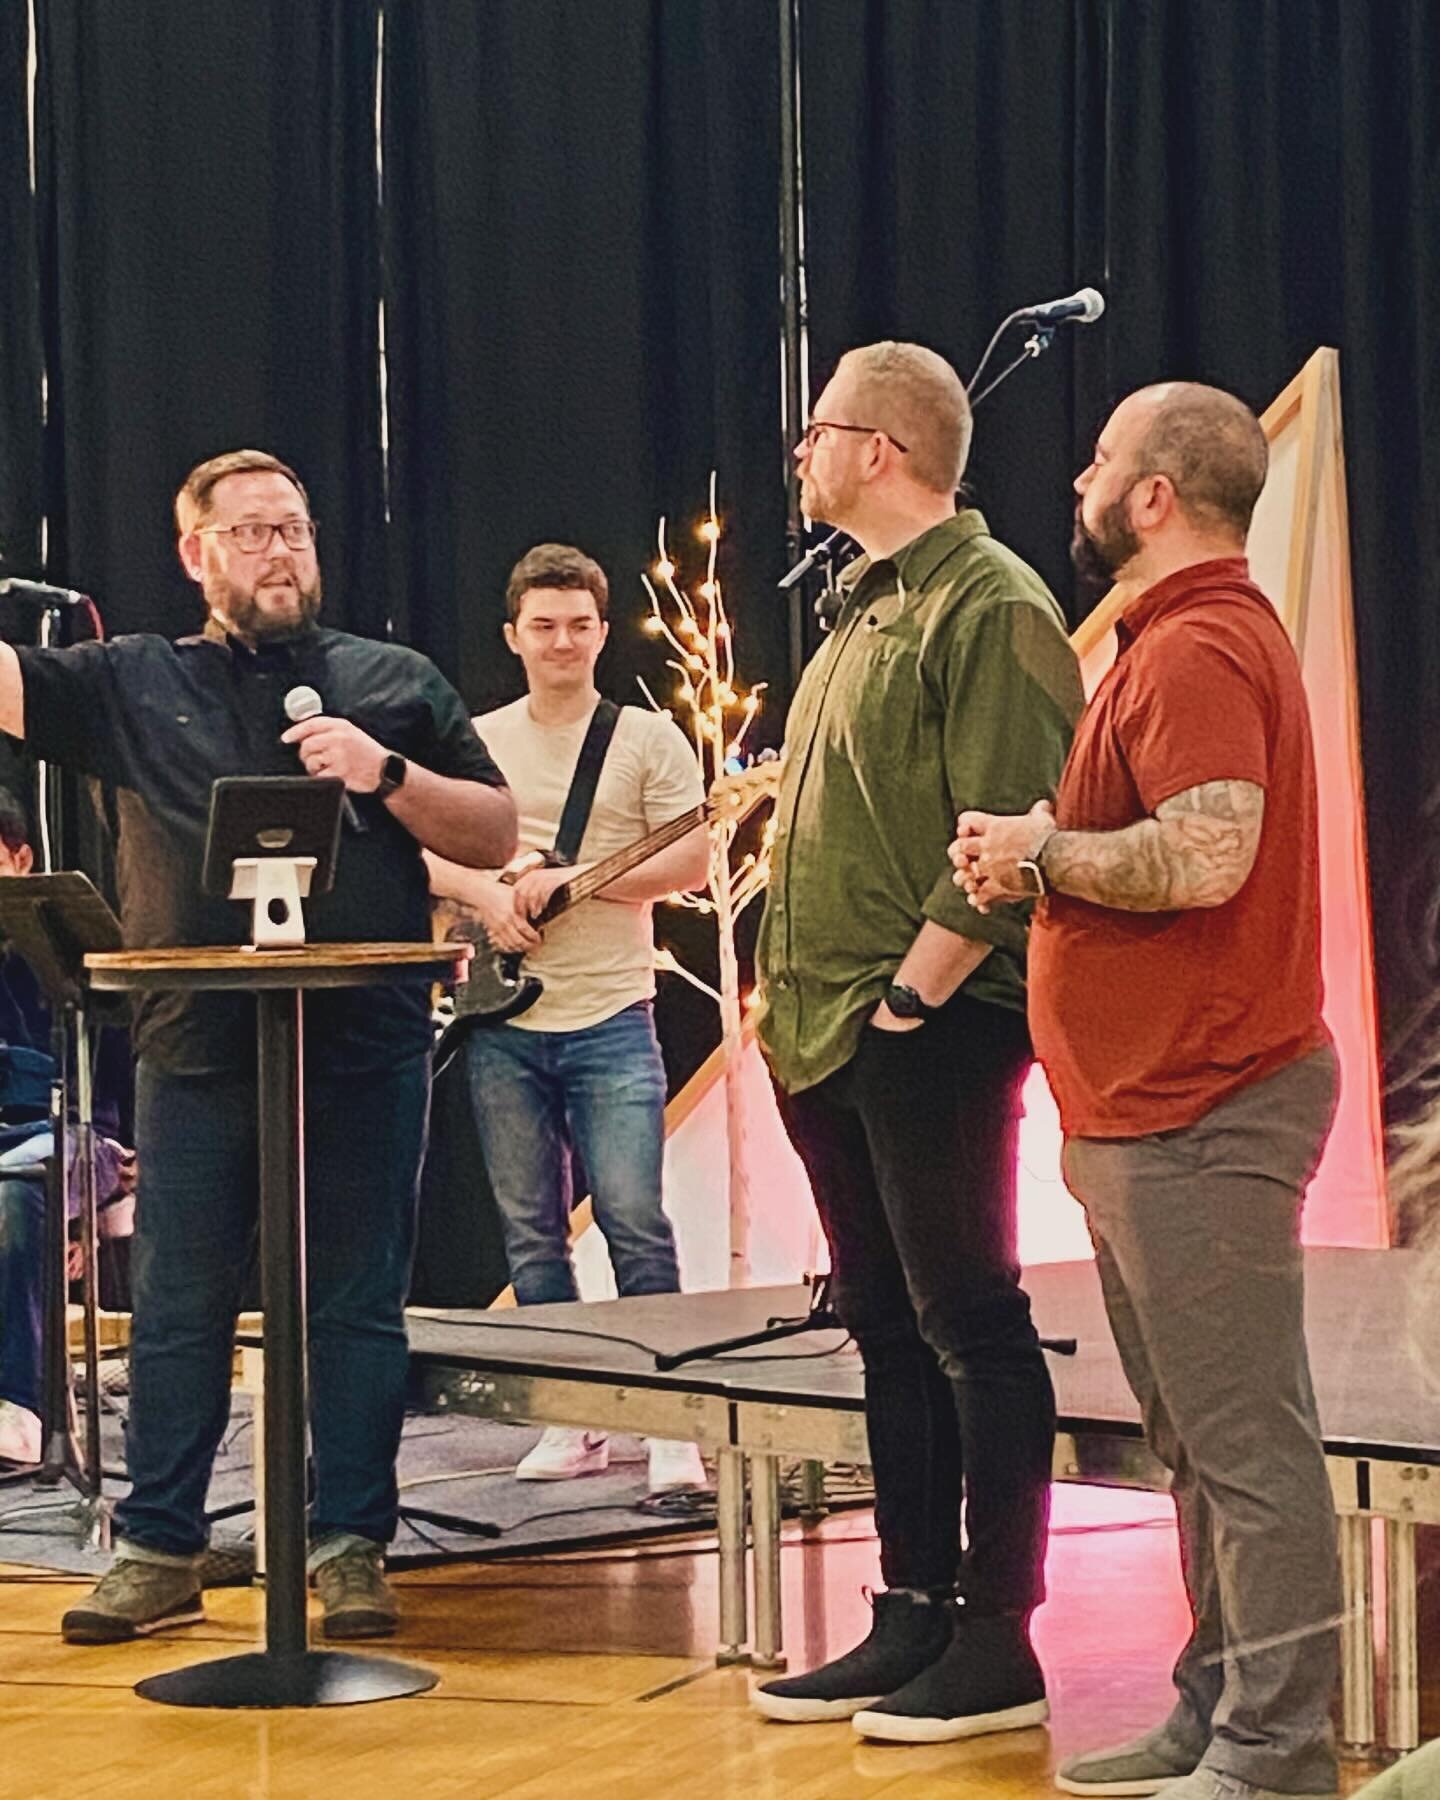 Yesterday we were thrilled to officially ordain pastors Dan and Kevin! Thank you for everyone who prayed and will continue to pray over them as they serve Roots!

#seattlechurch #rootscommunitychurch #rootscc